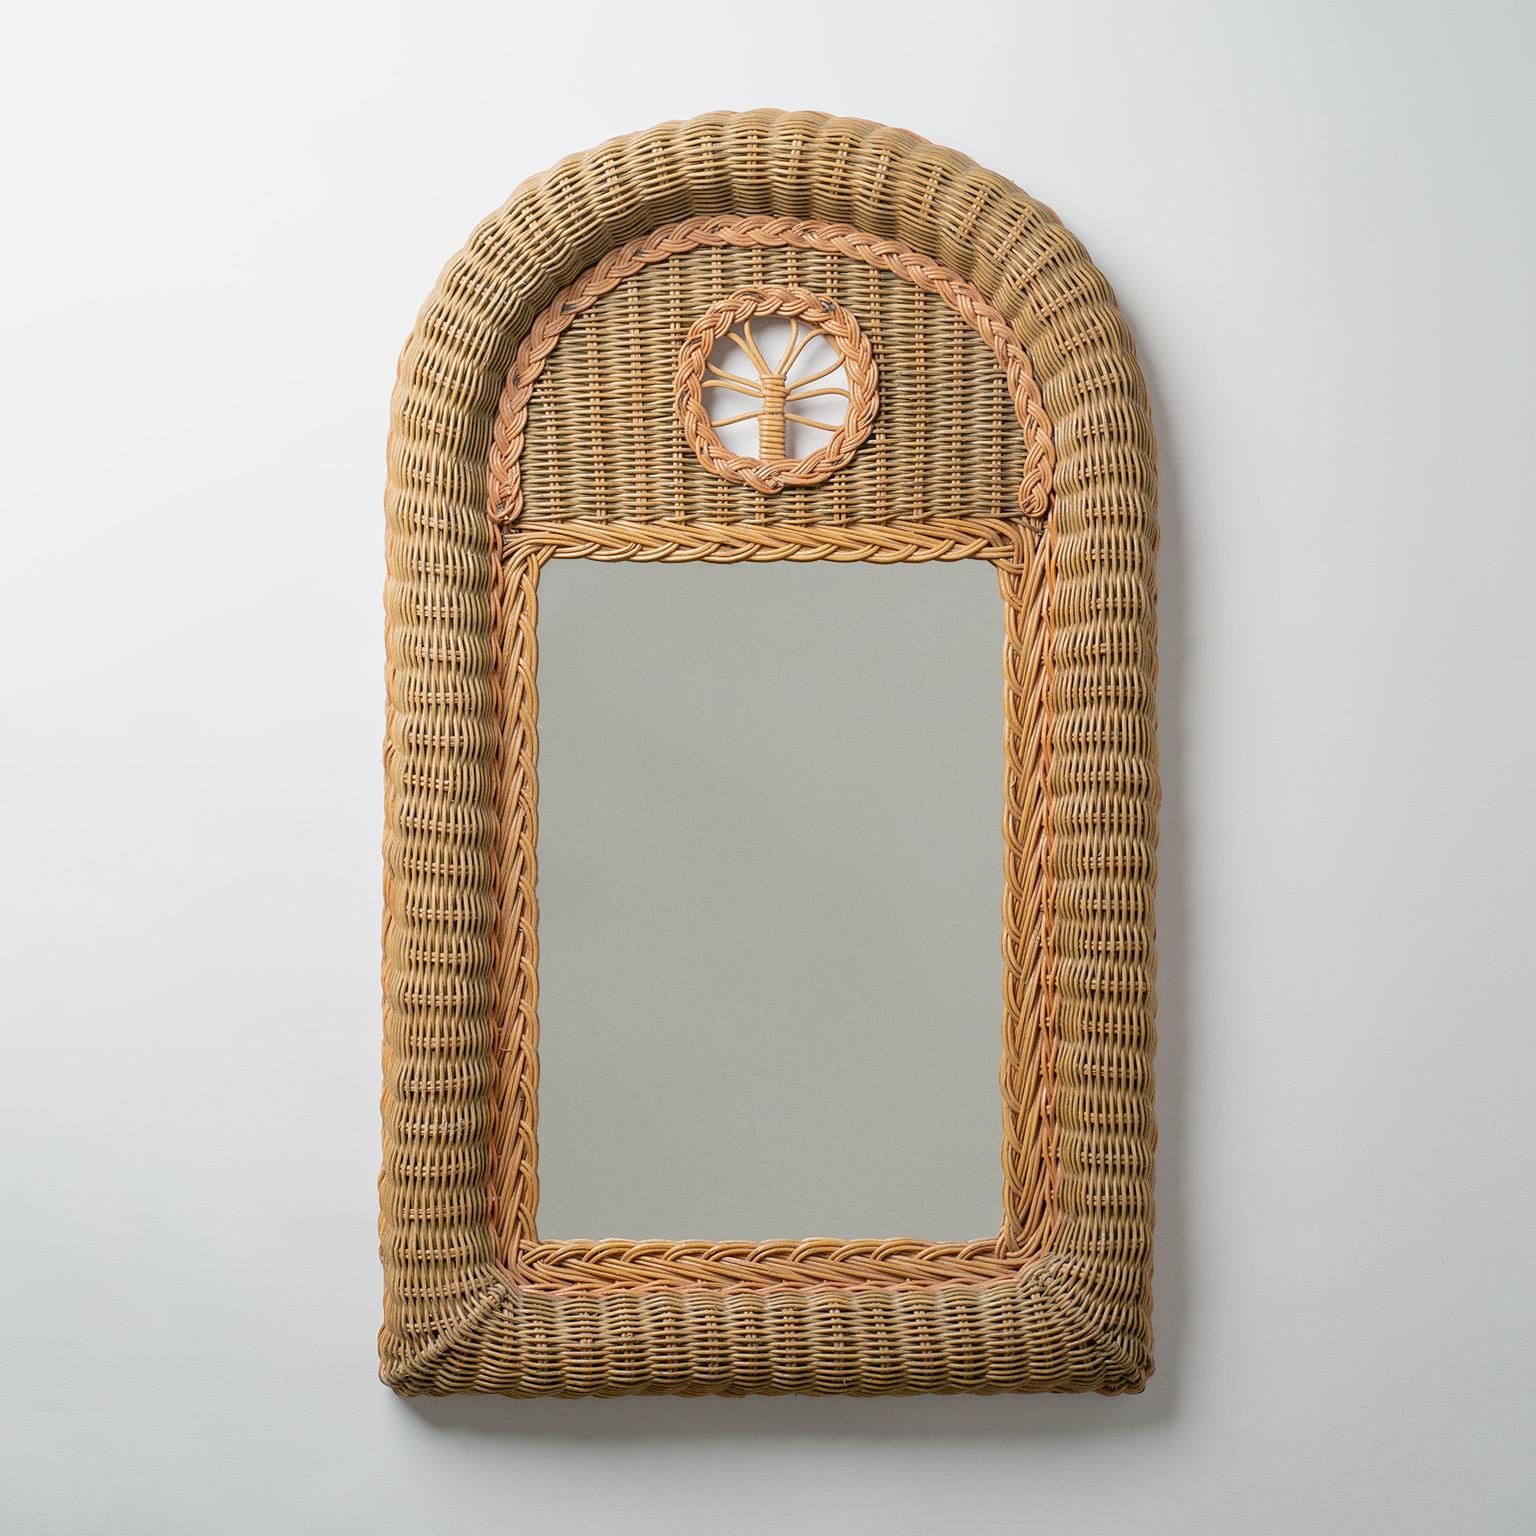 French artisanal rattan mirror from the 1970s. Nice Folk Art rendition of the classic French Trumeau mirror in subdued earthy tones with a charming floral detail.Very nice original condition with original mirror.
Measures: Height 78cm (30.5″), Width